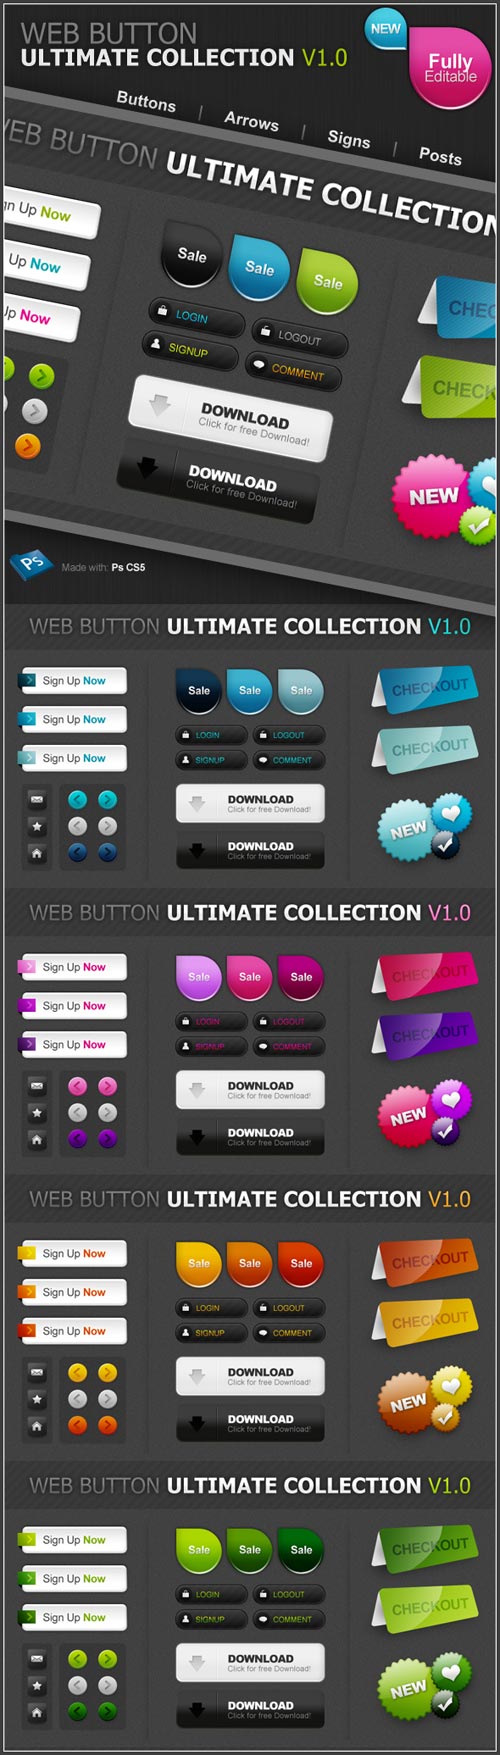 Web Buttons Ultimate Collection v.1